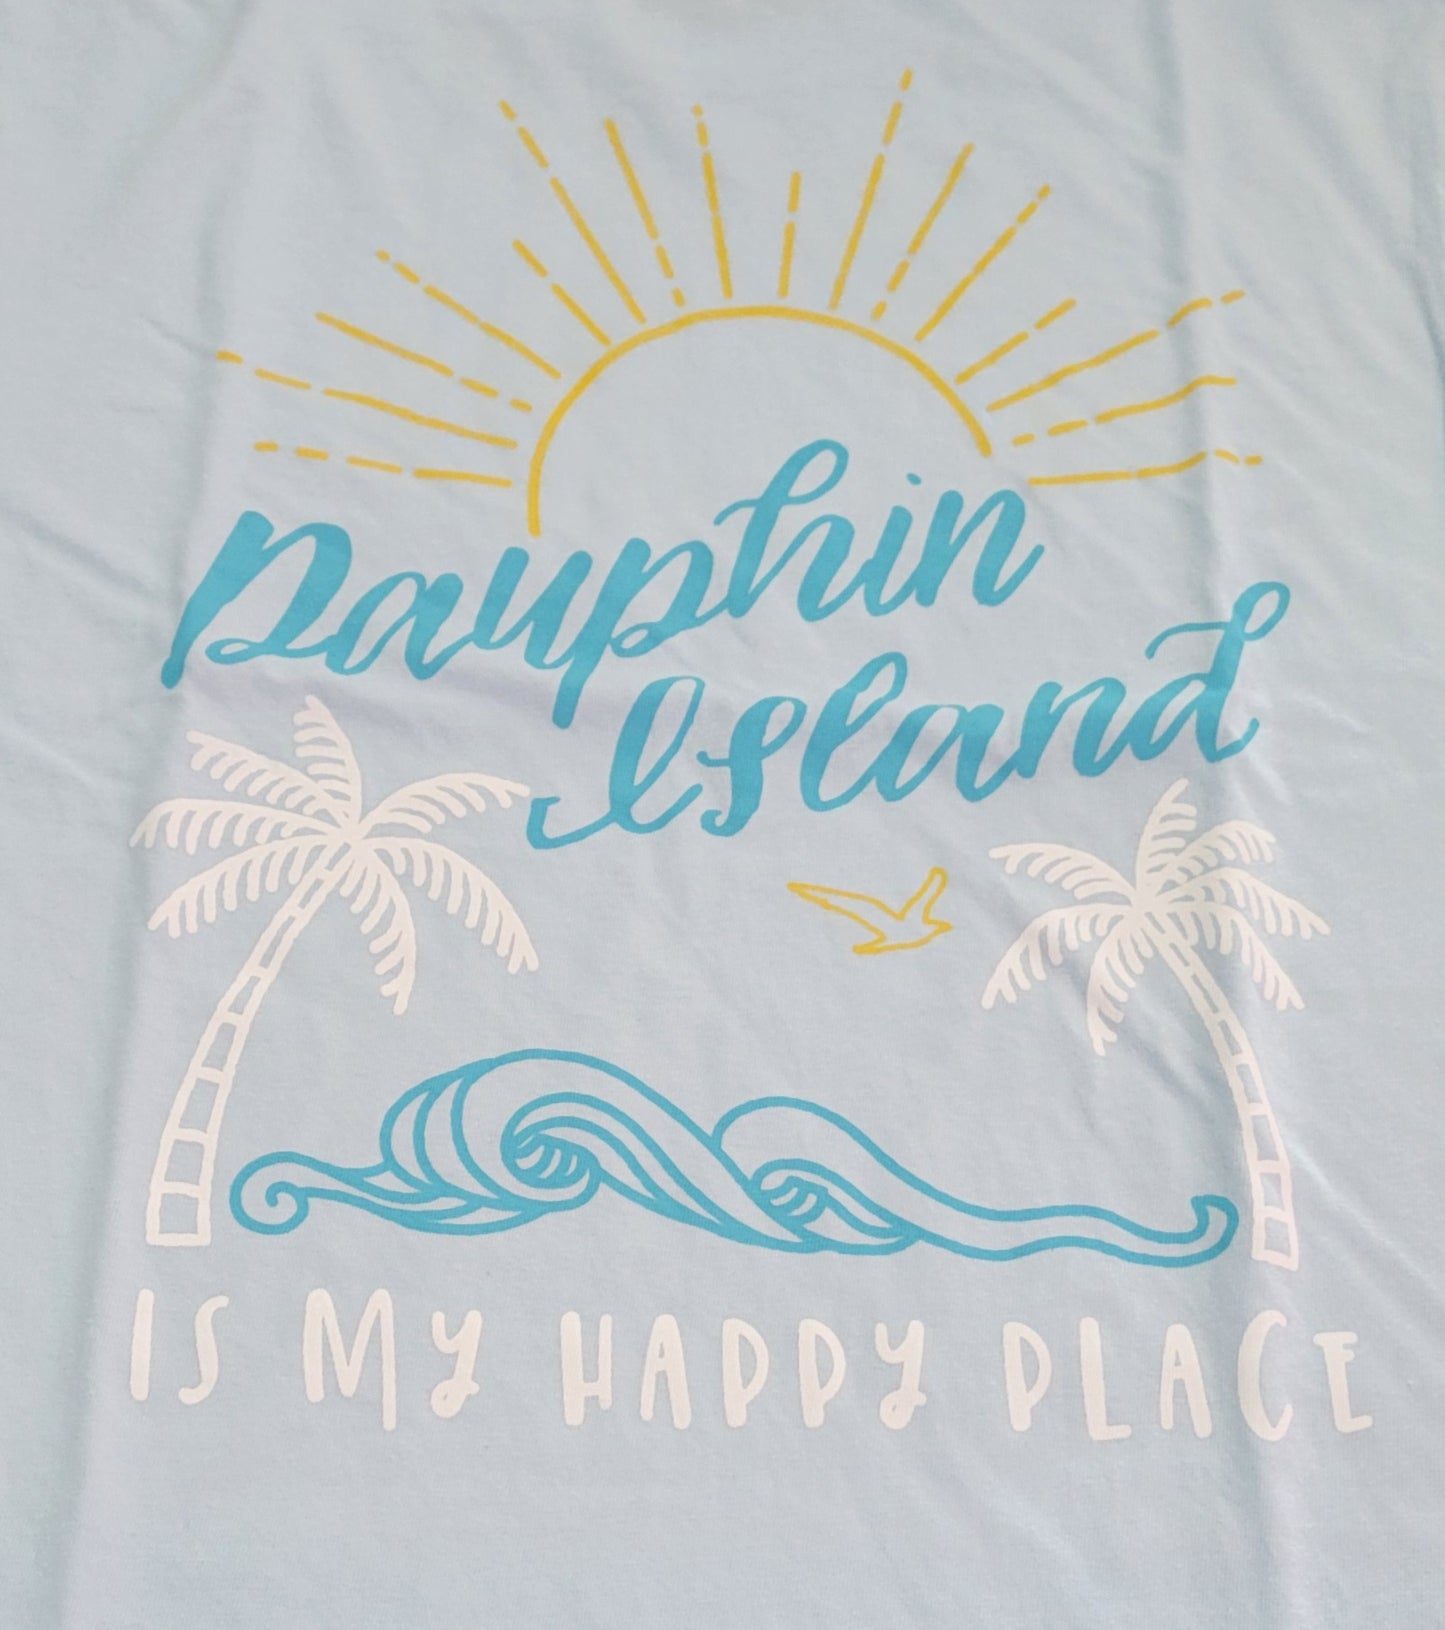 DAUPHIN ISLAND IS MY HAPPY PLACE LS T-SHIRT